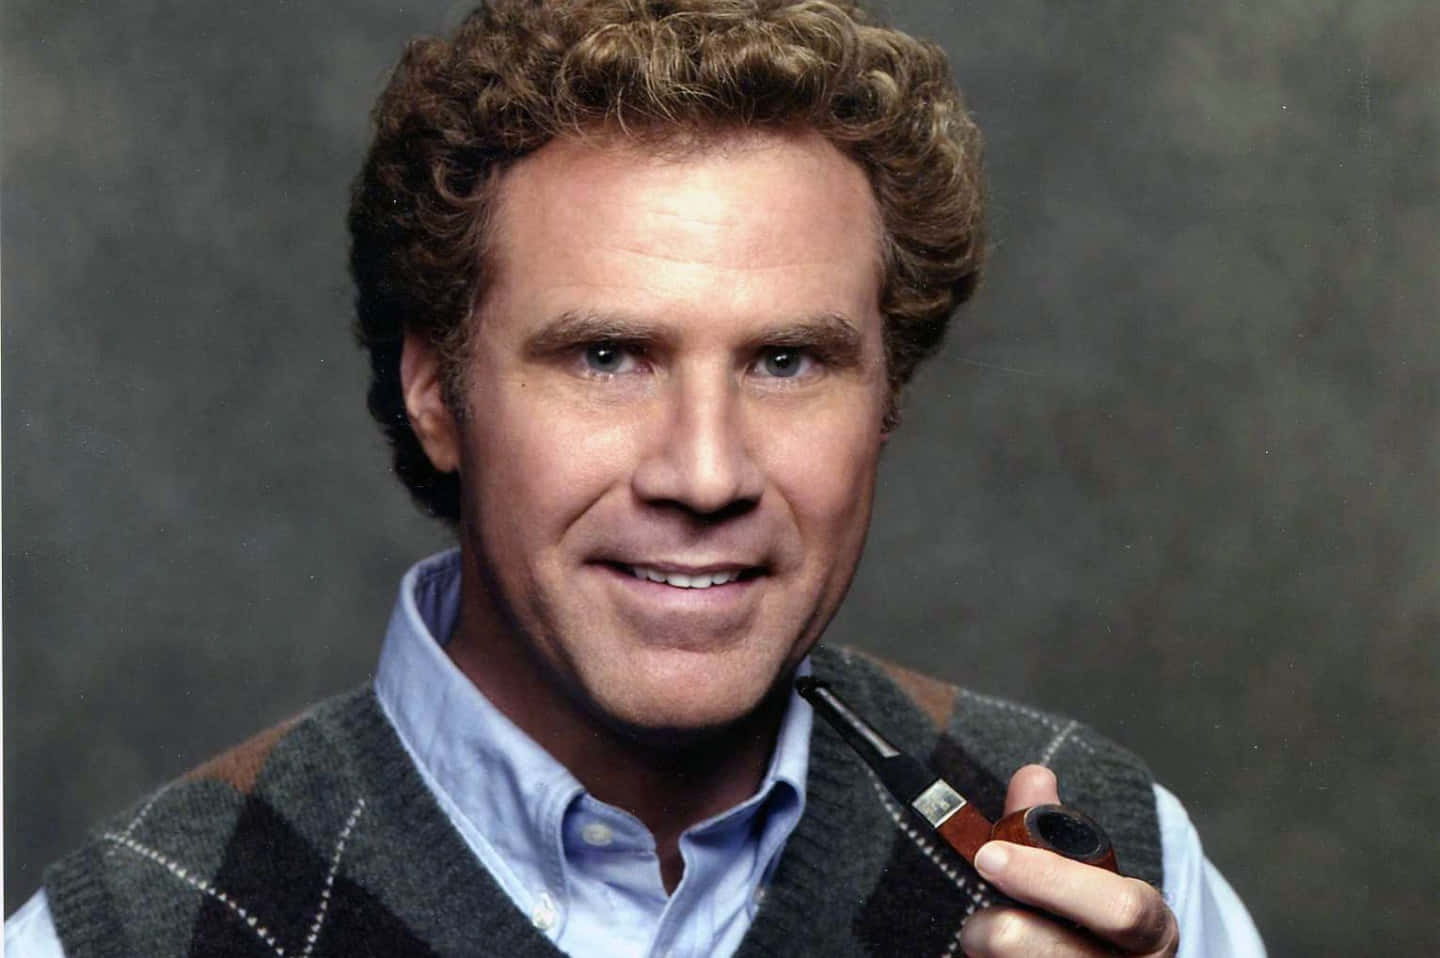 Will Ferrell posing with arms crossed in a suit Wallpaper